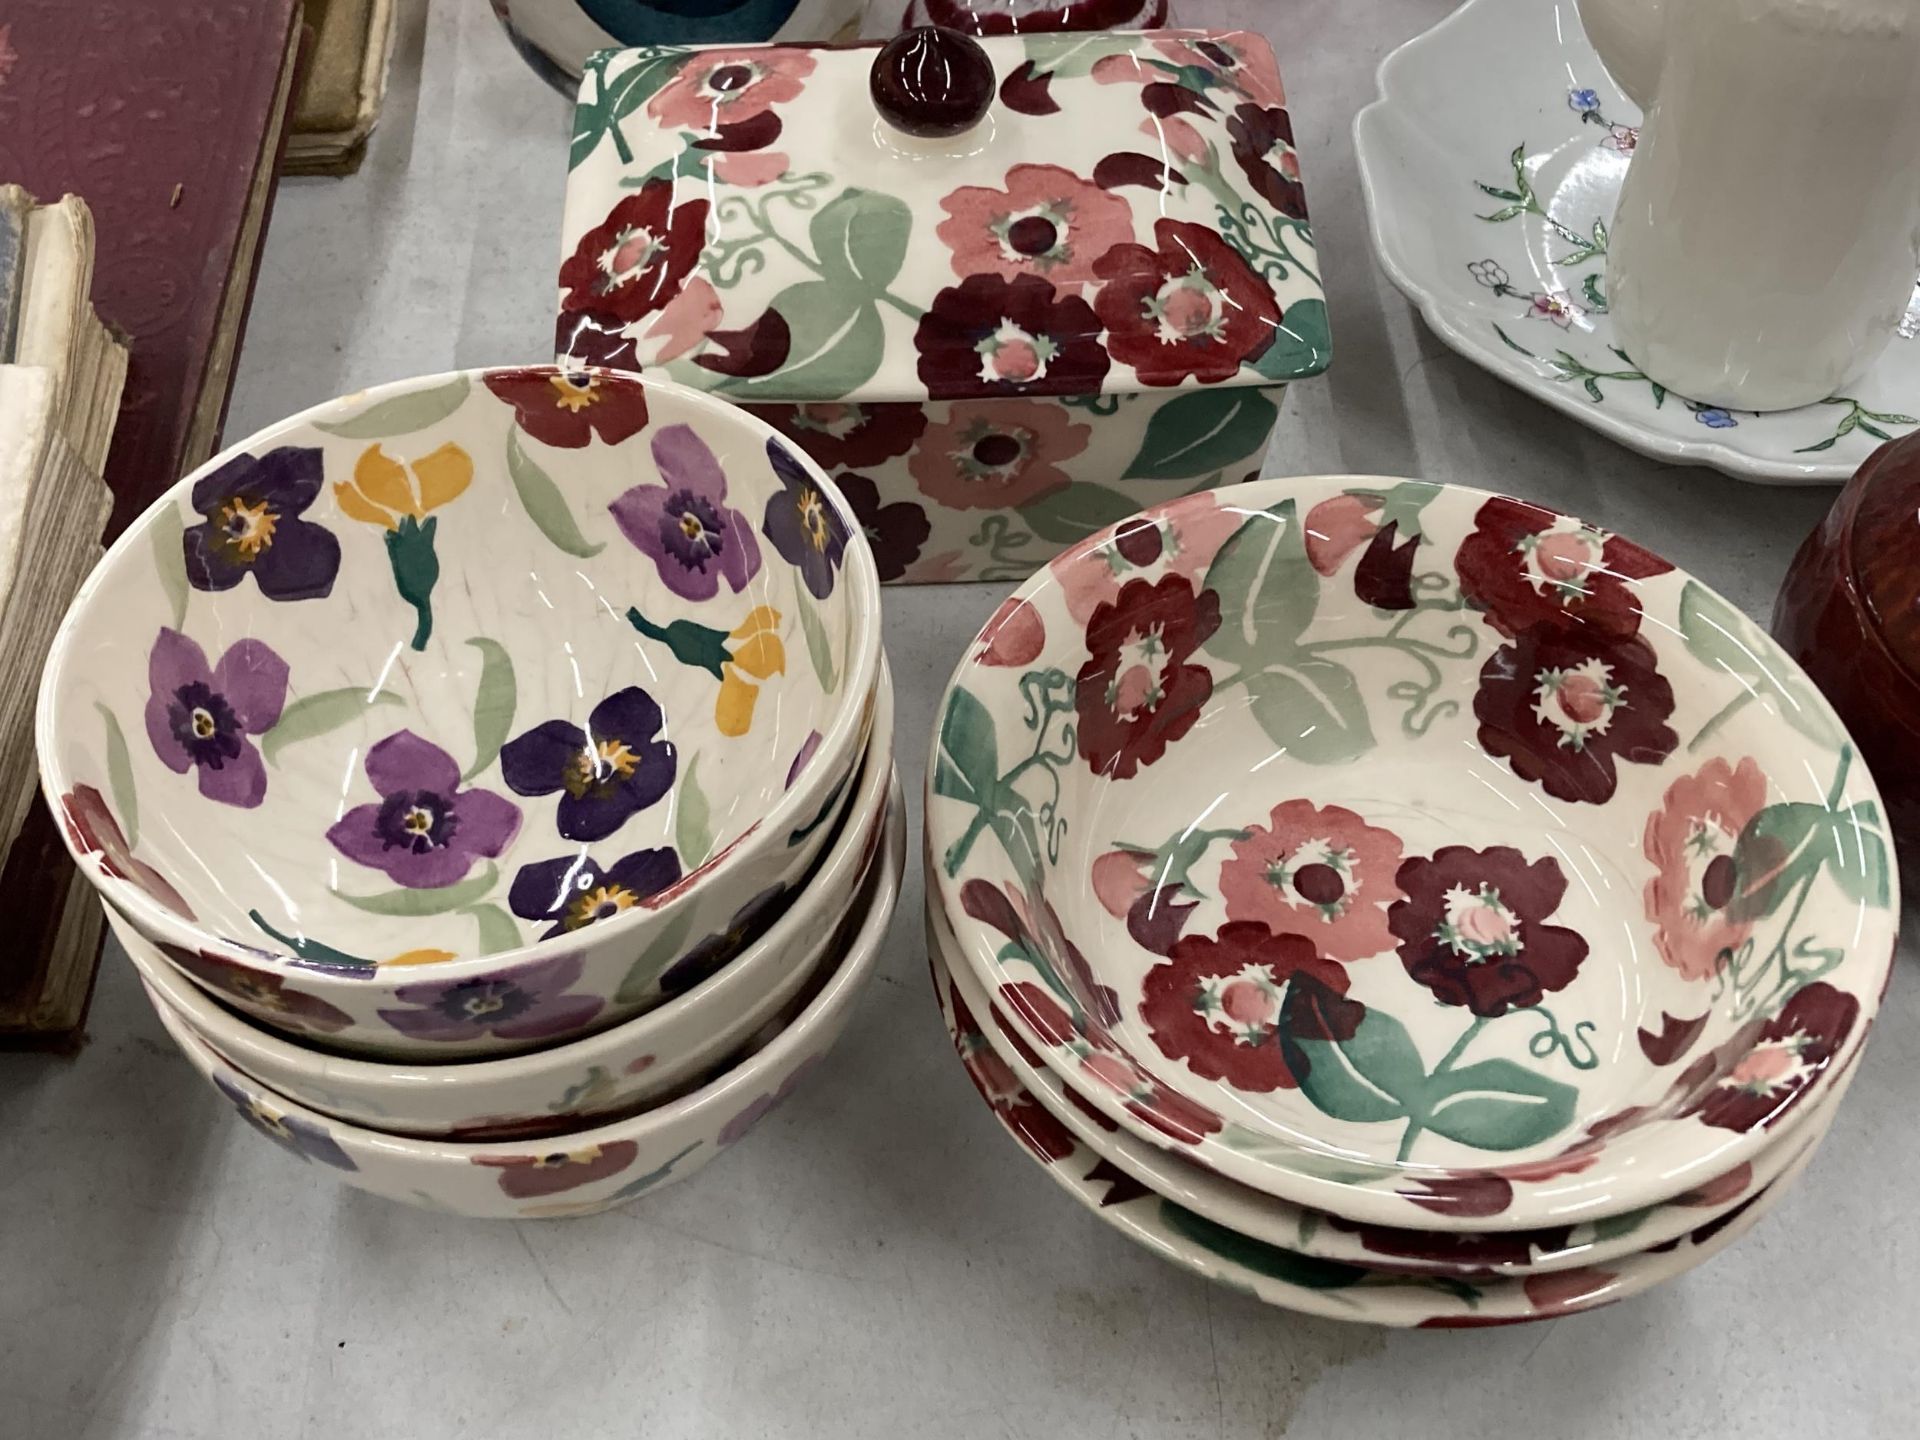 A COLLECTION OF EMMA BRIDGEWATER POTTERY TO INCLUDE A BUTTER DISH AND BOWLS IN A FLORAL PATTERN